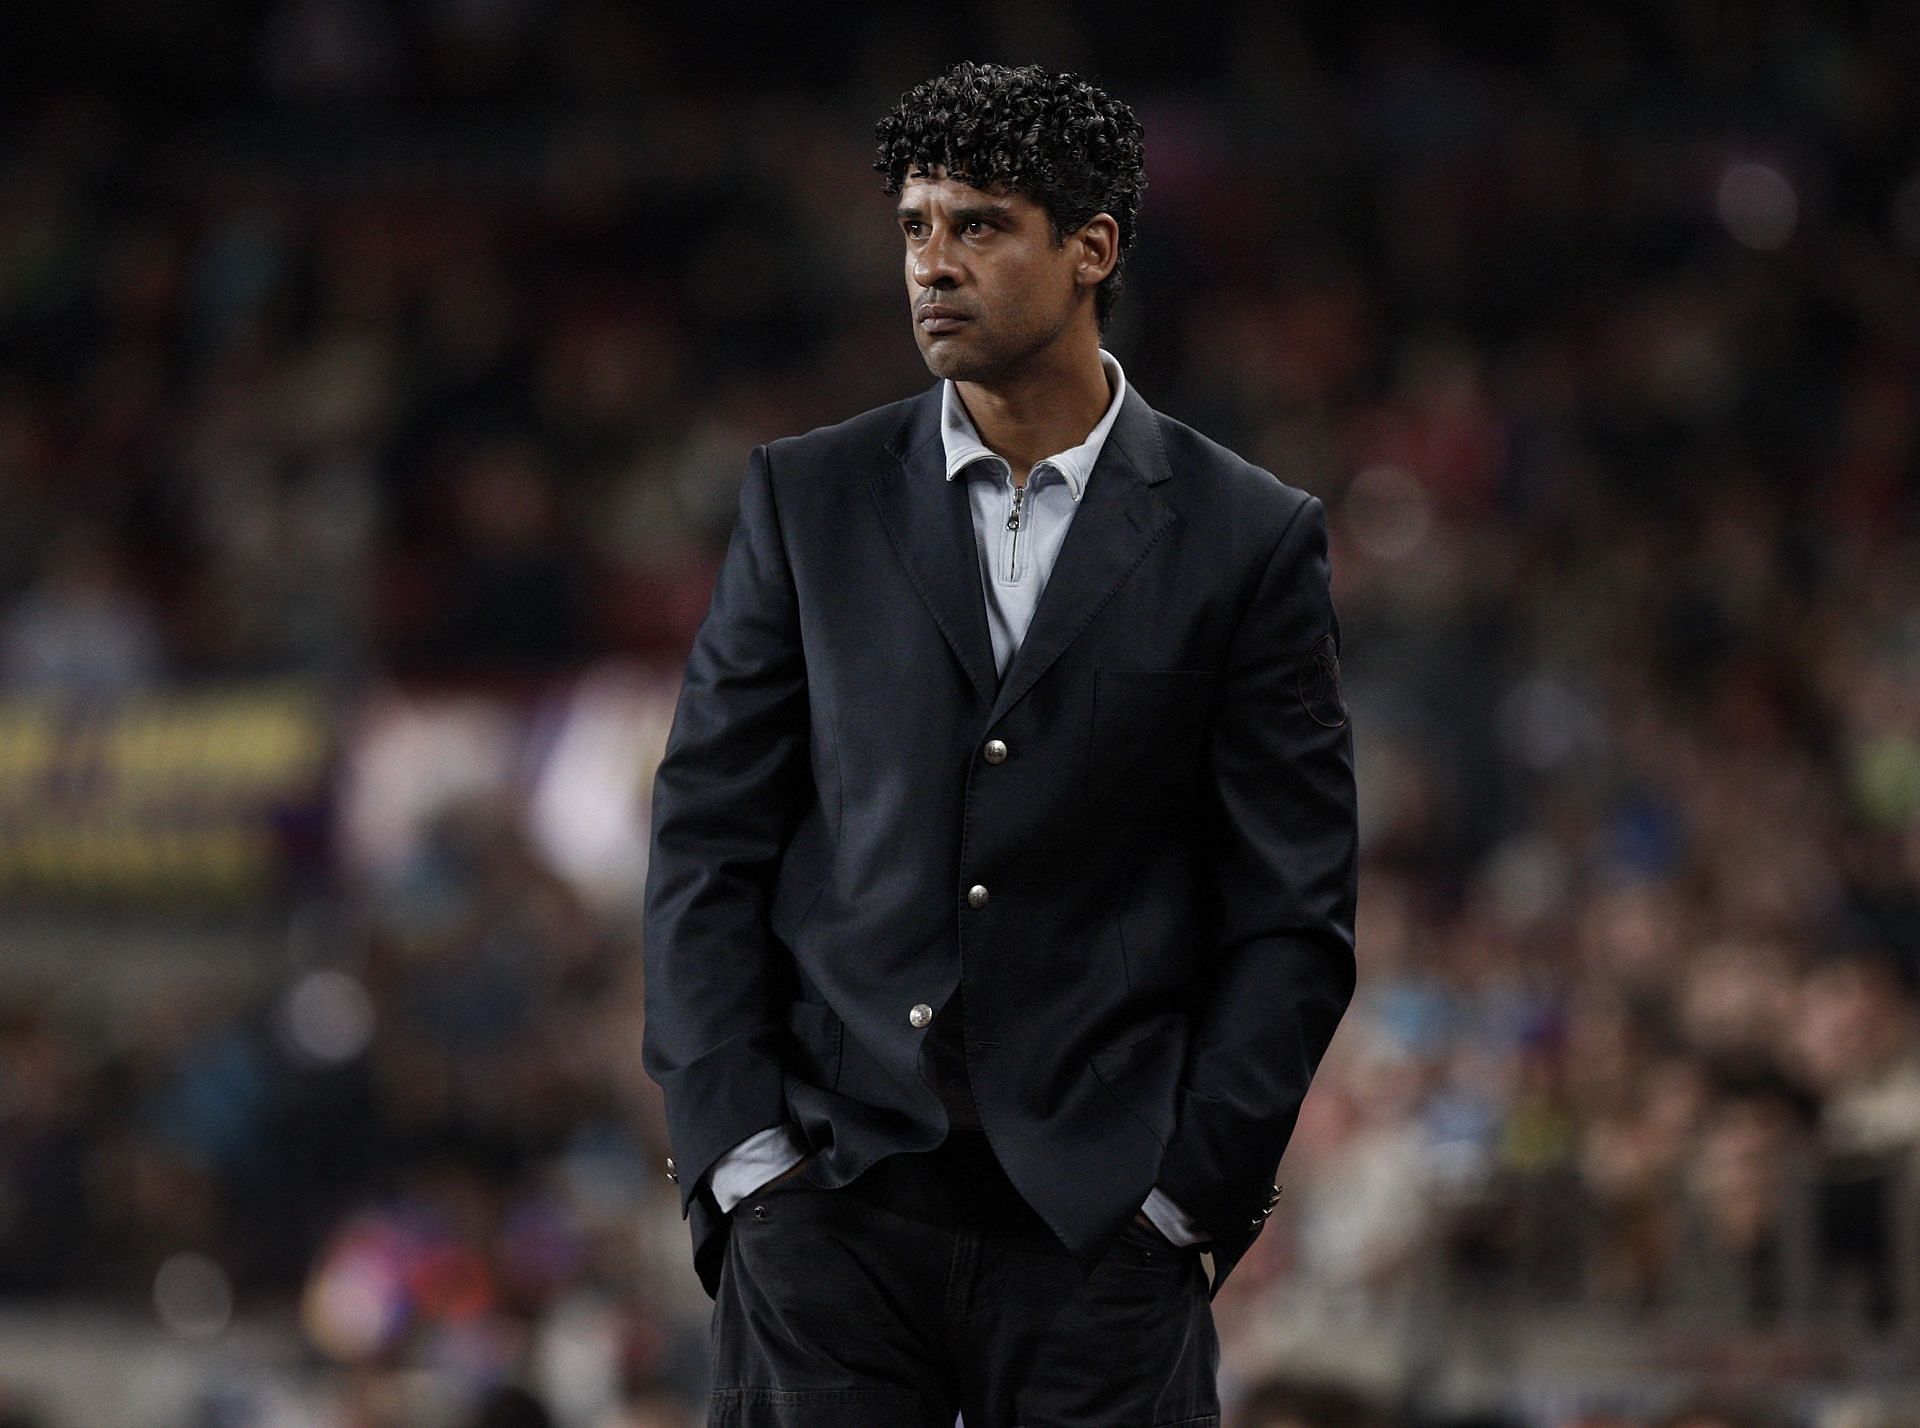 Rijkaard guided Barcelona to Champions League glory in 2006